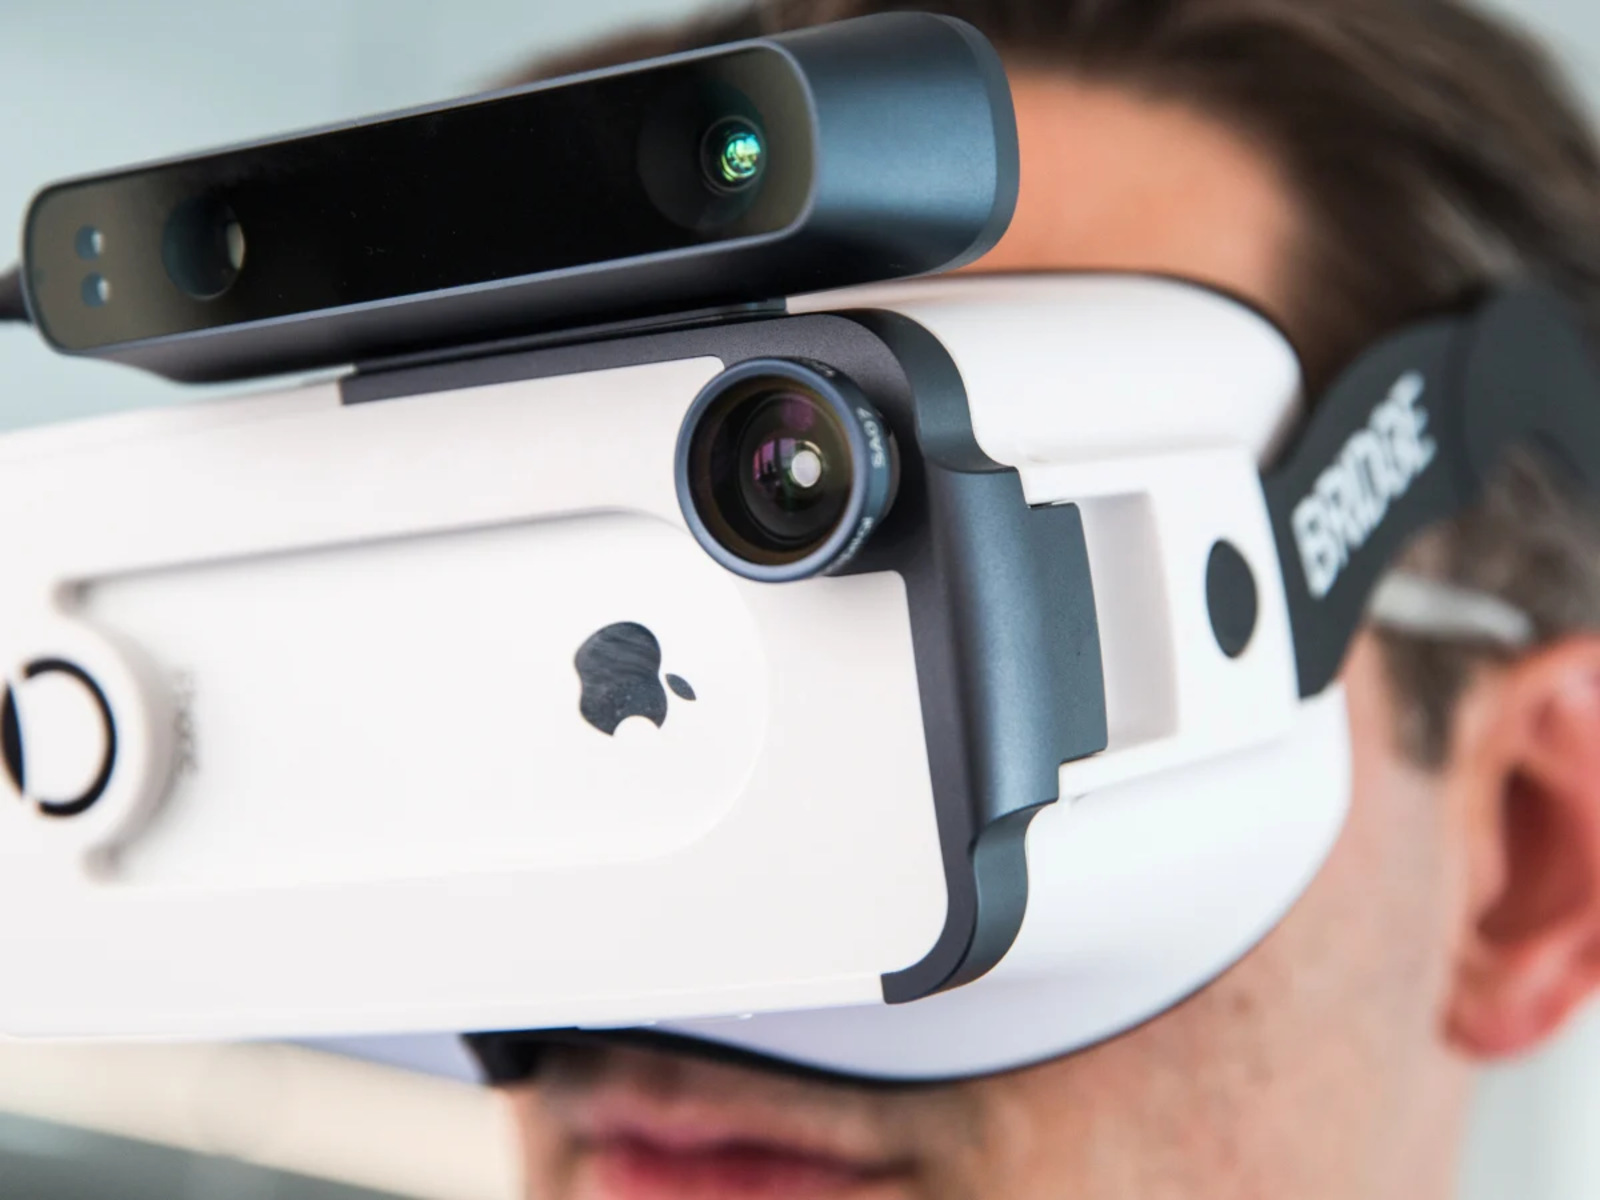 How To Use VR Headset With IPhone